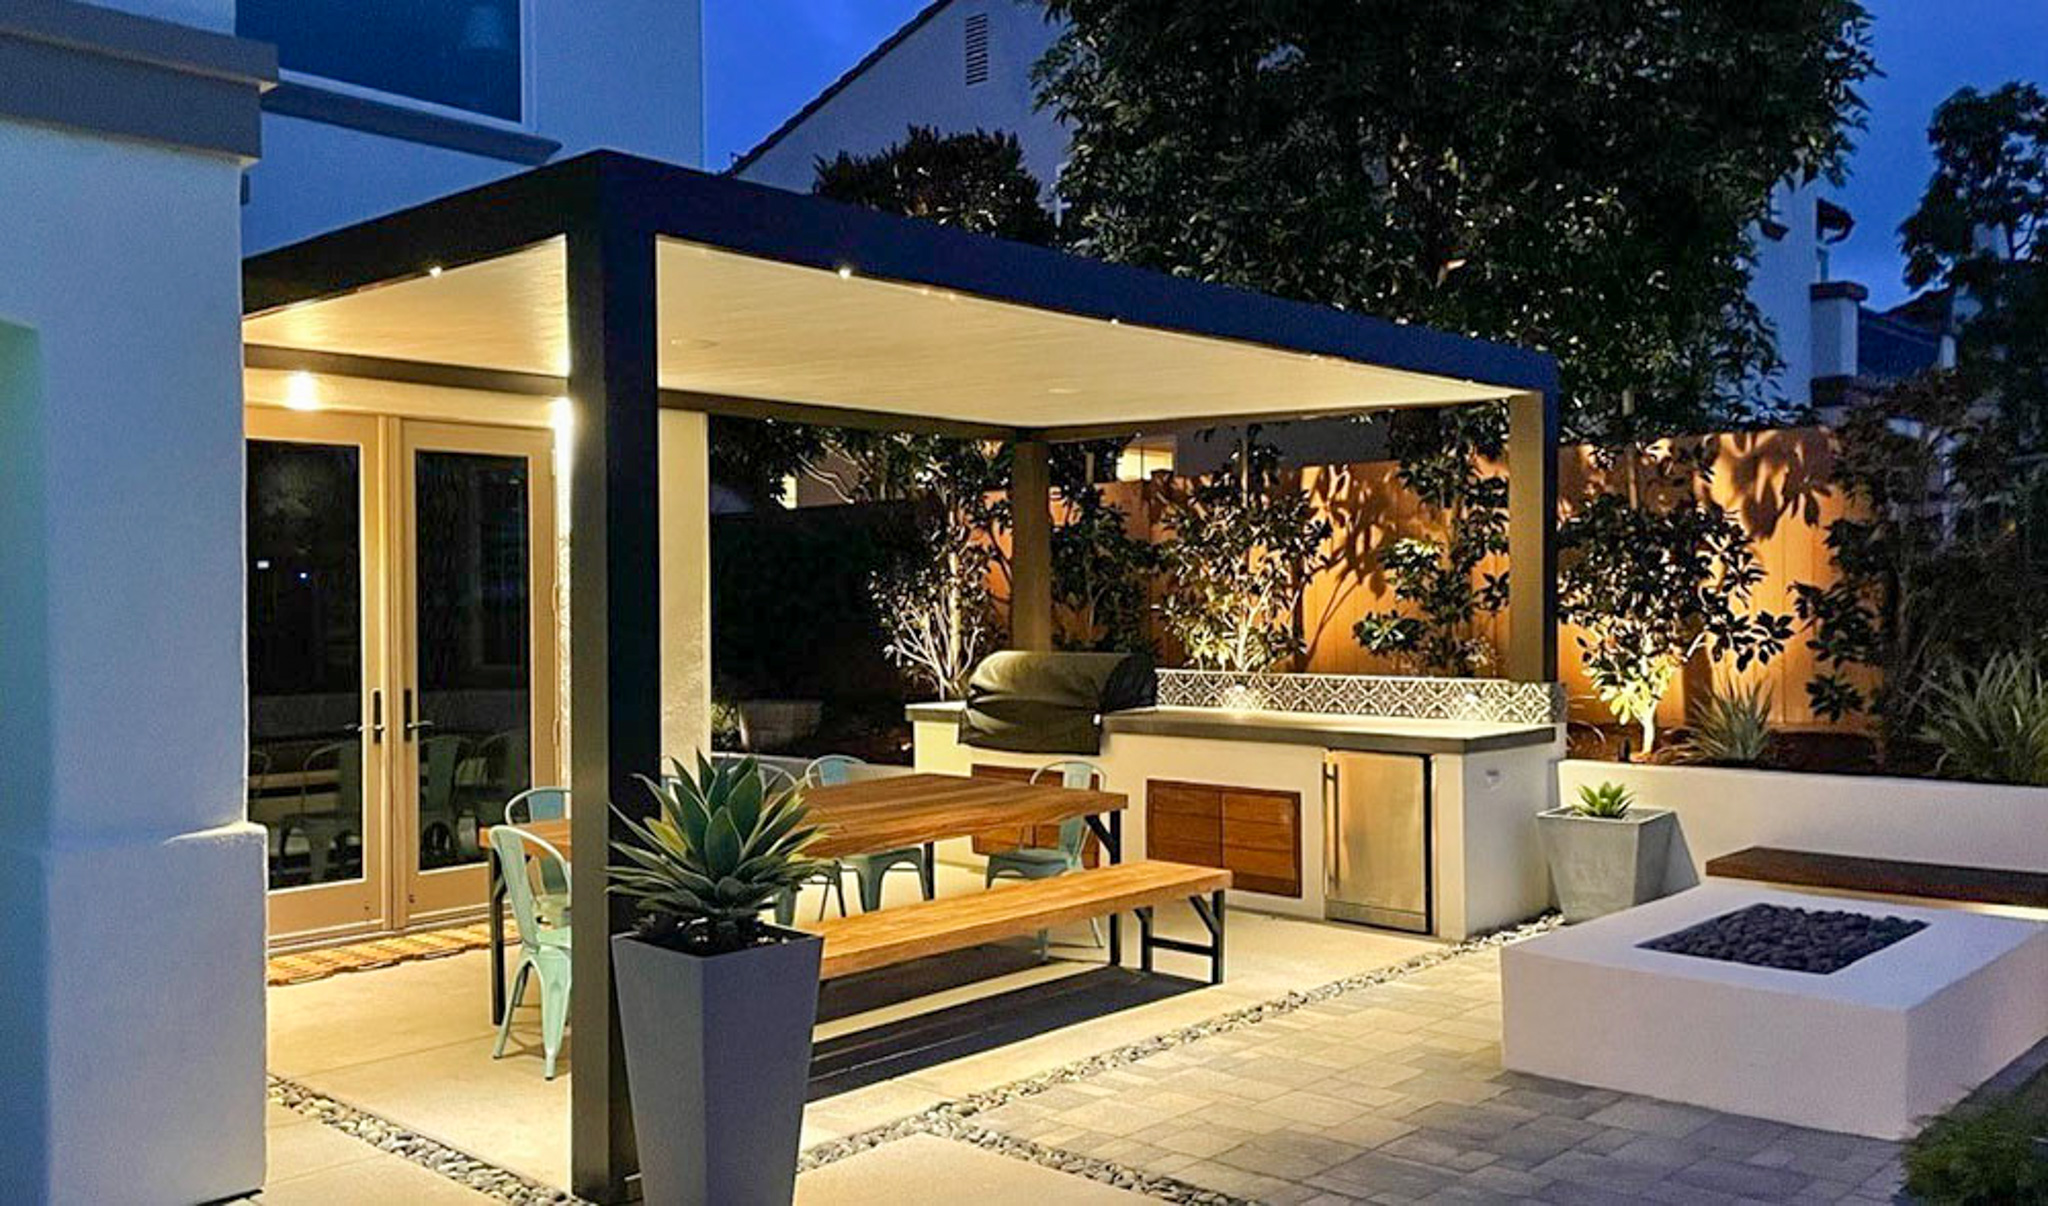 Contemporary style solid patio cover made of aluminum over outdoor sitting area with table and barbecue, at night with lights on in outdoor space